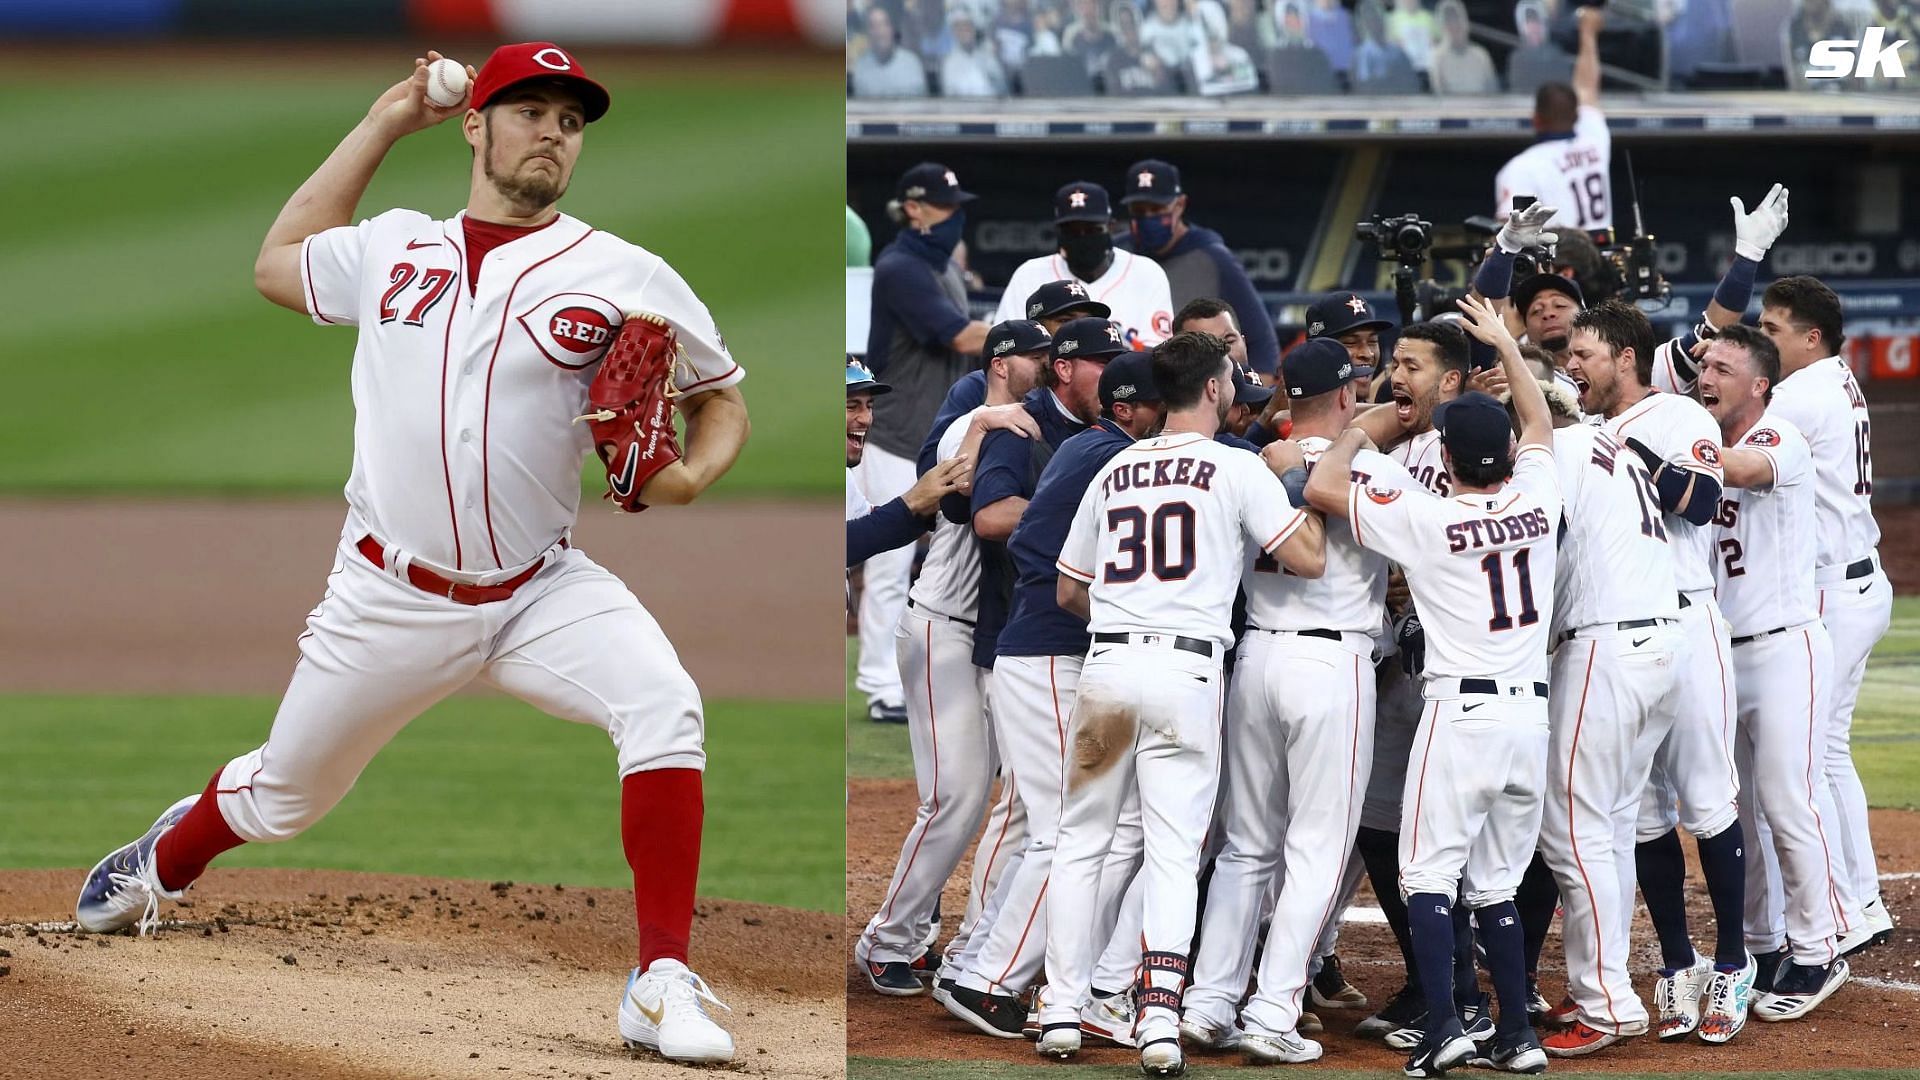 Trevor Bauer during his time with the Cincinnati Reds in 2020 and the Houston Astros celebrating after a win in the 2020 season.